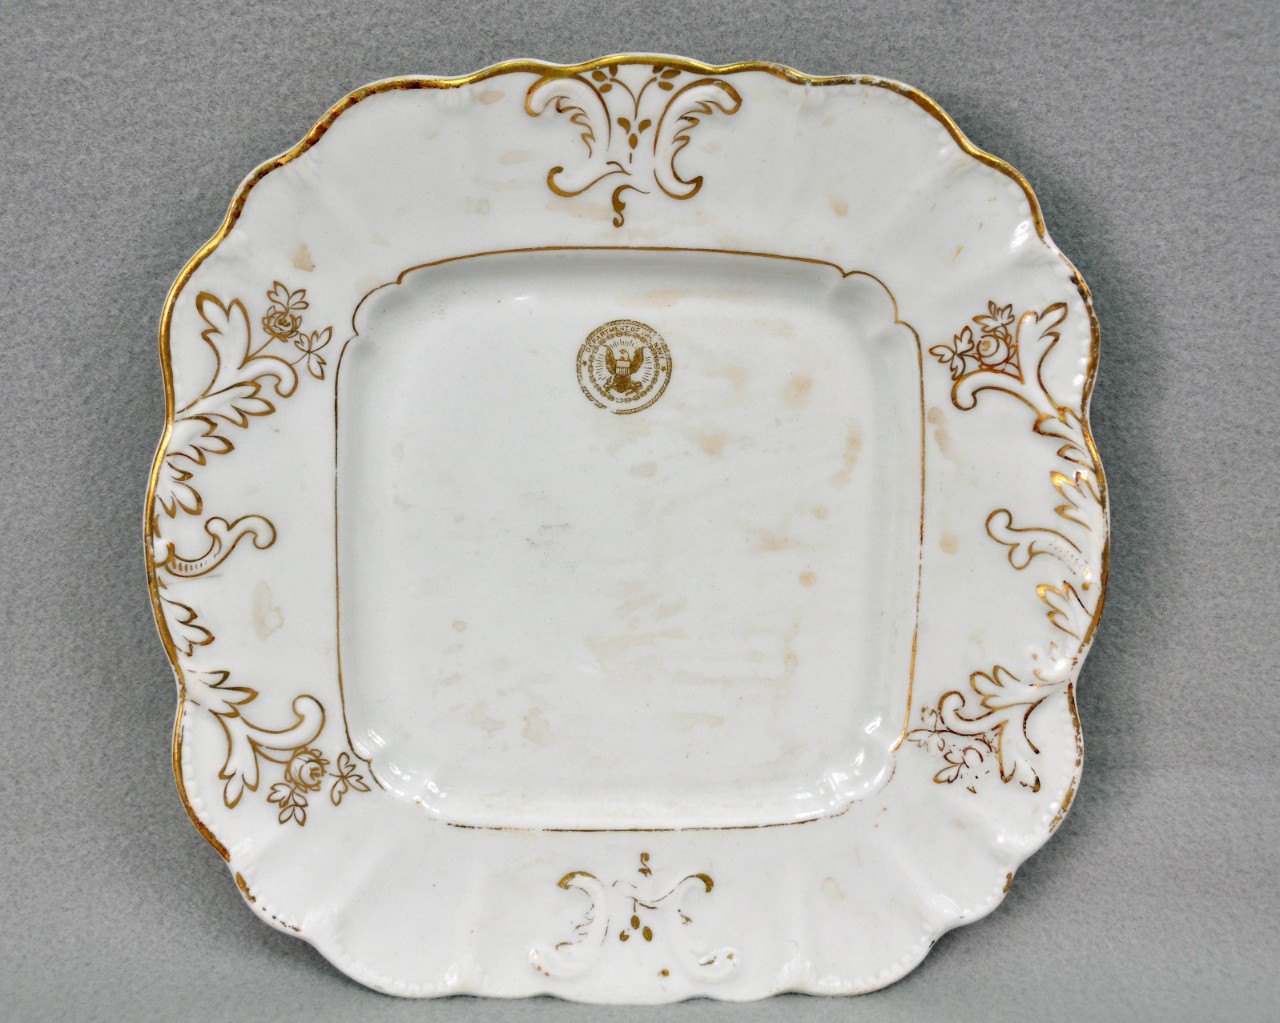 <p>A white, ceramic, square-shaped plate. It is decorated with gilded floral molding on the lip and has a gold eagle seal that says “Department of the Navy” on the top.</p>
